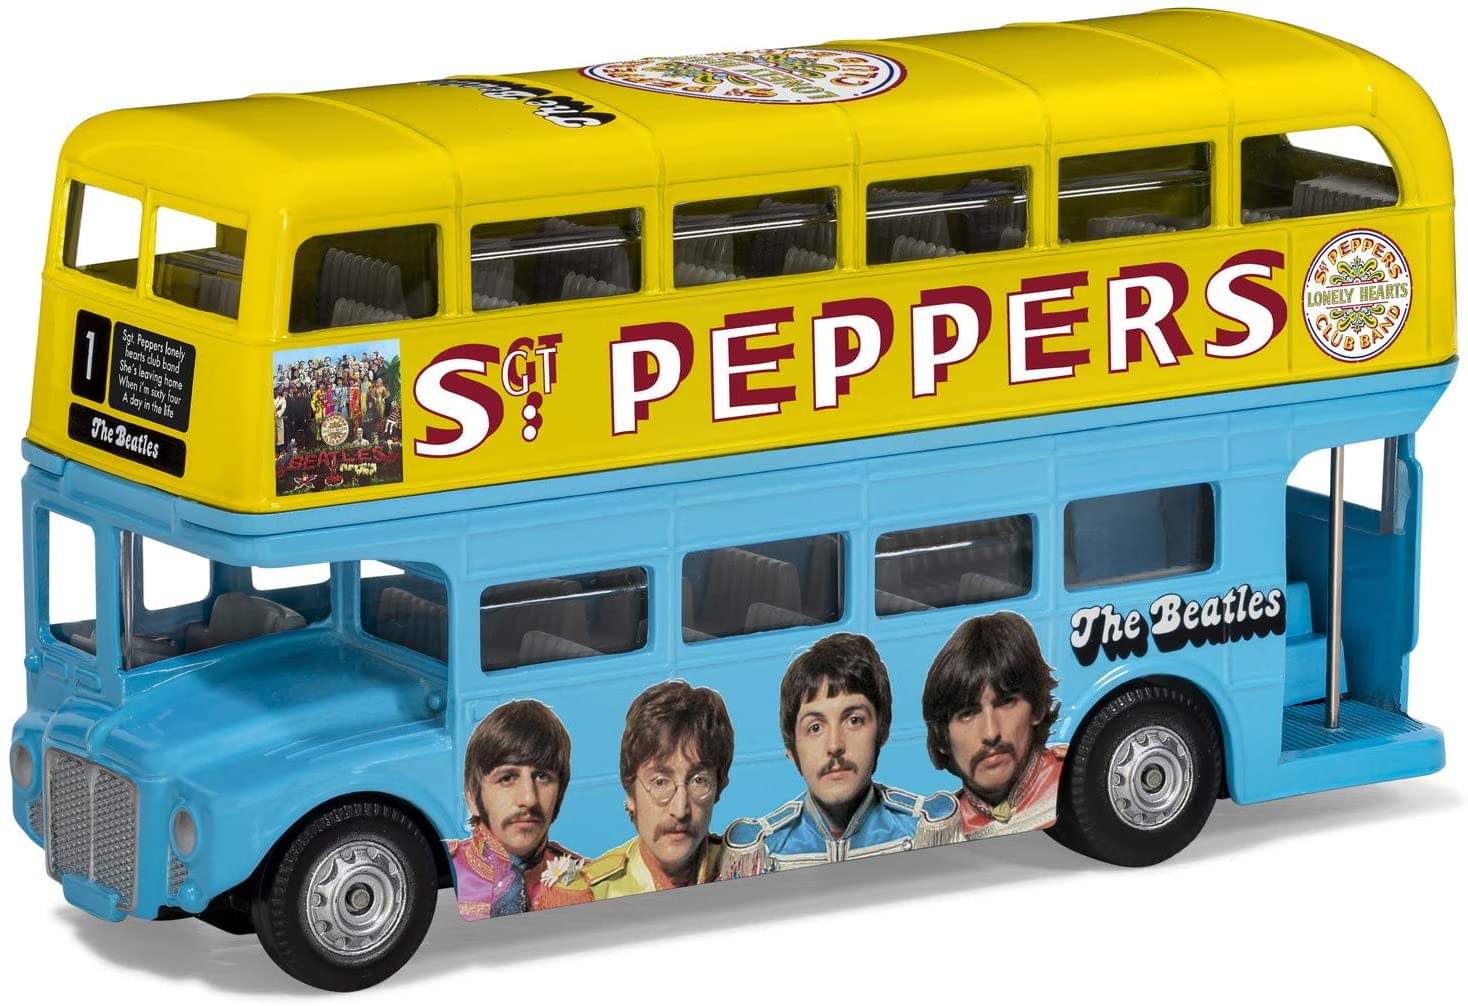 The Beatles 1:76 Diecast Vehicle , Sgt Peppers Lonely Hearts Club Band Bus